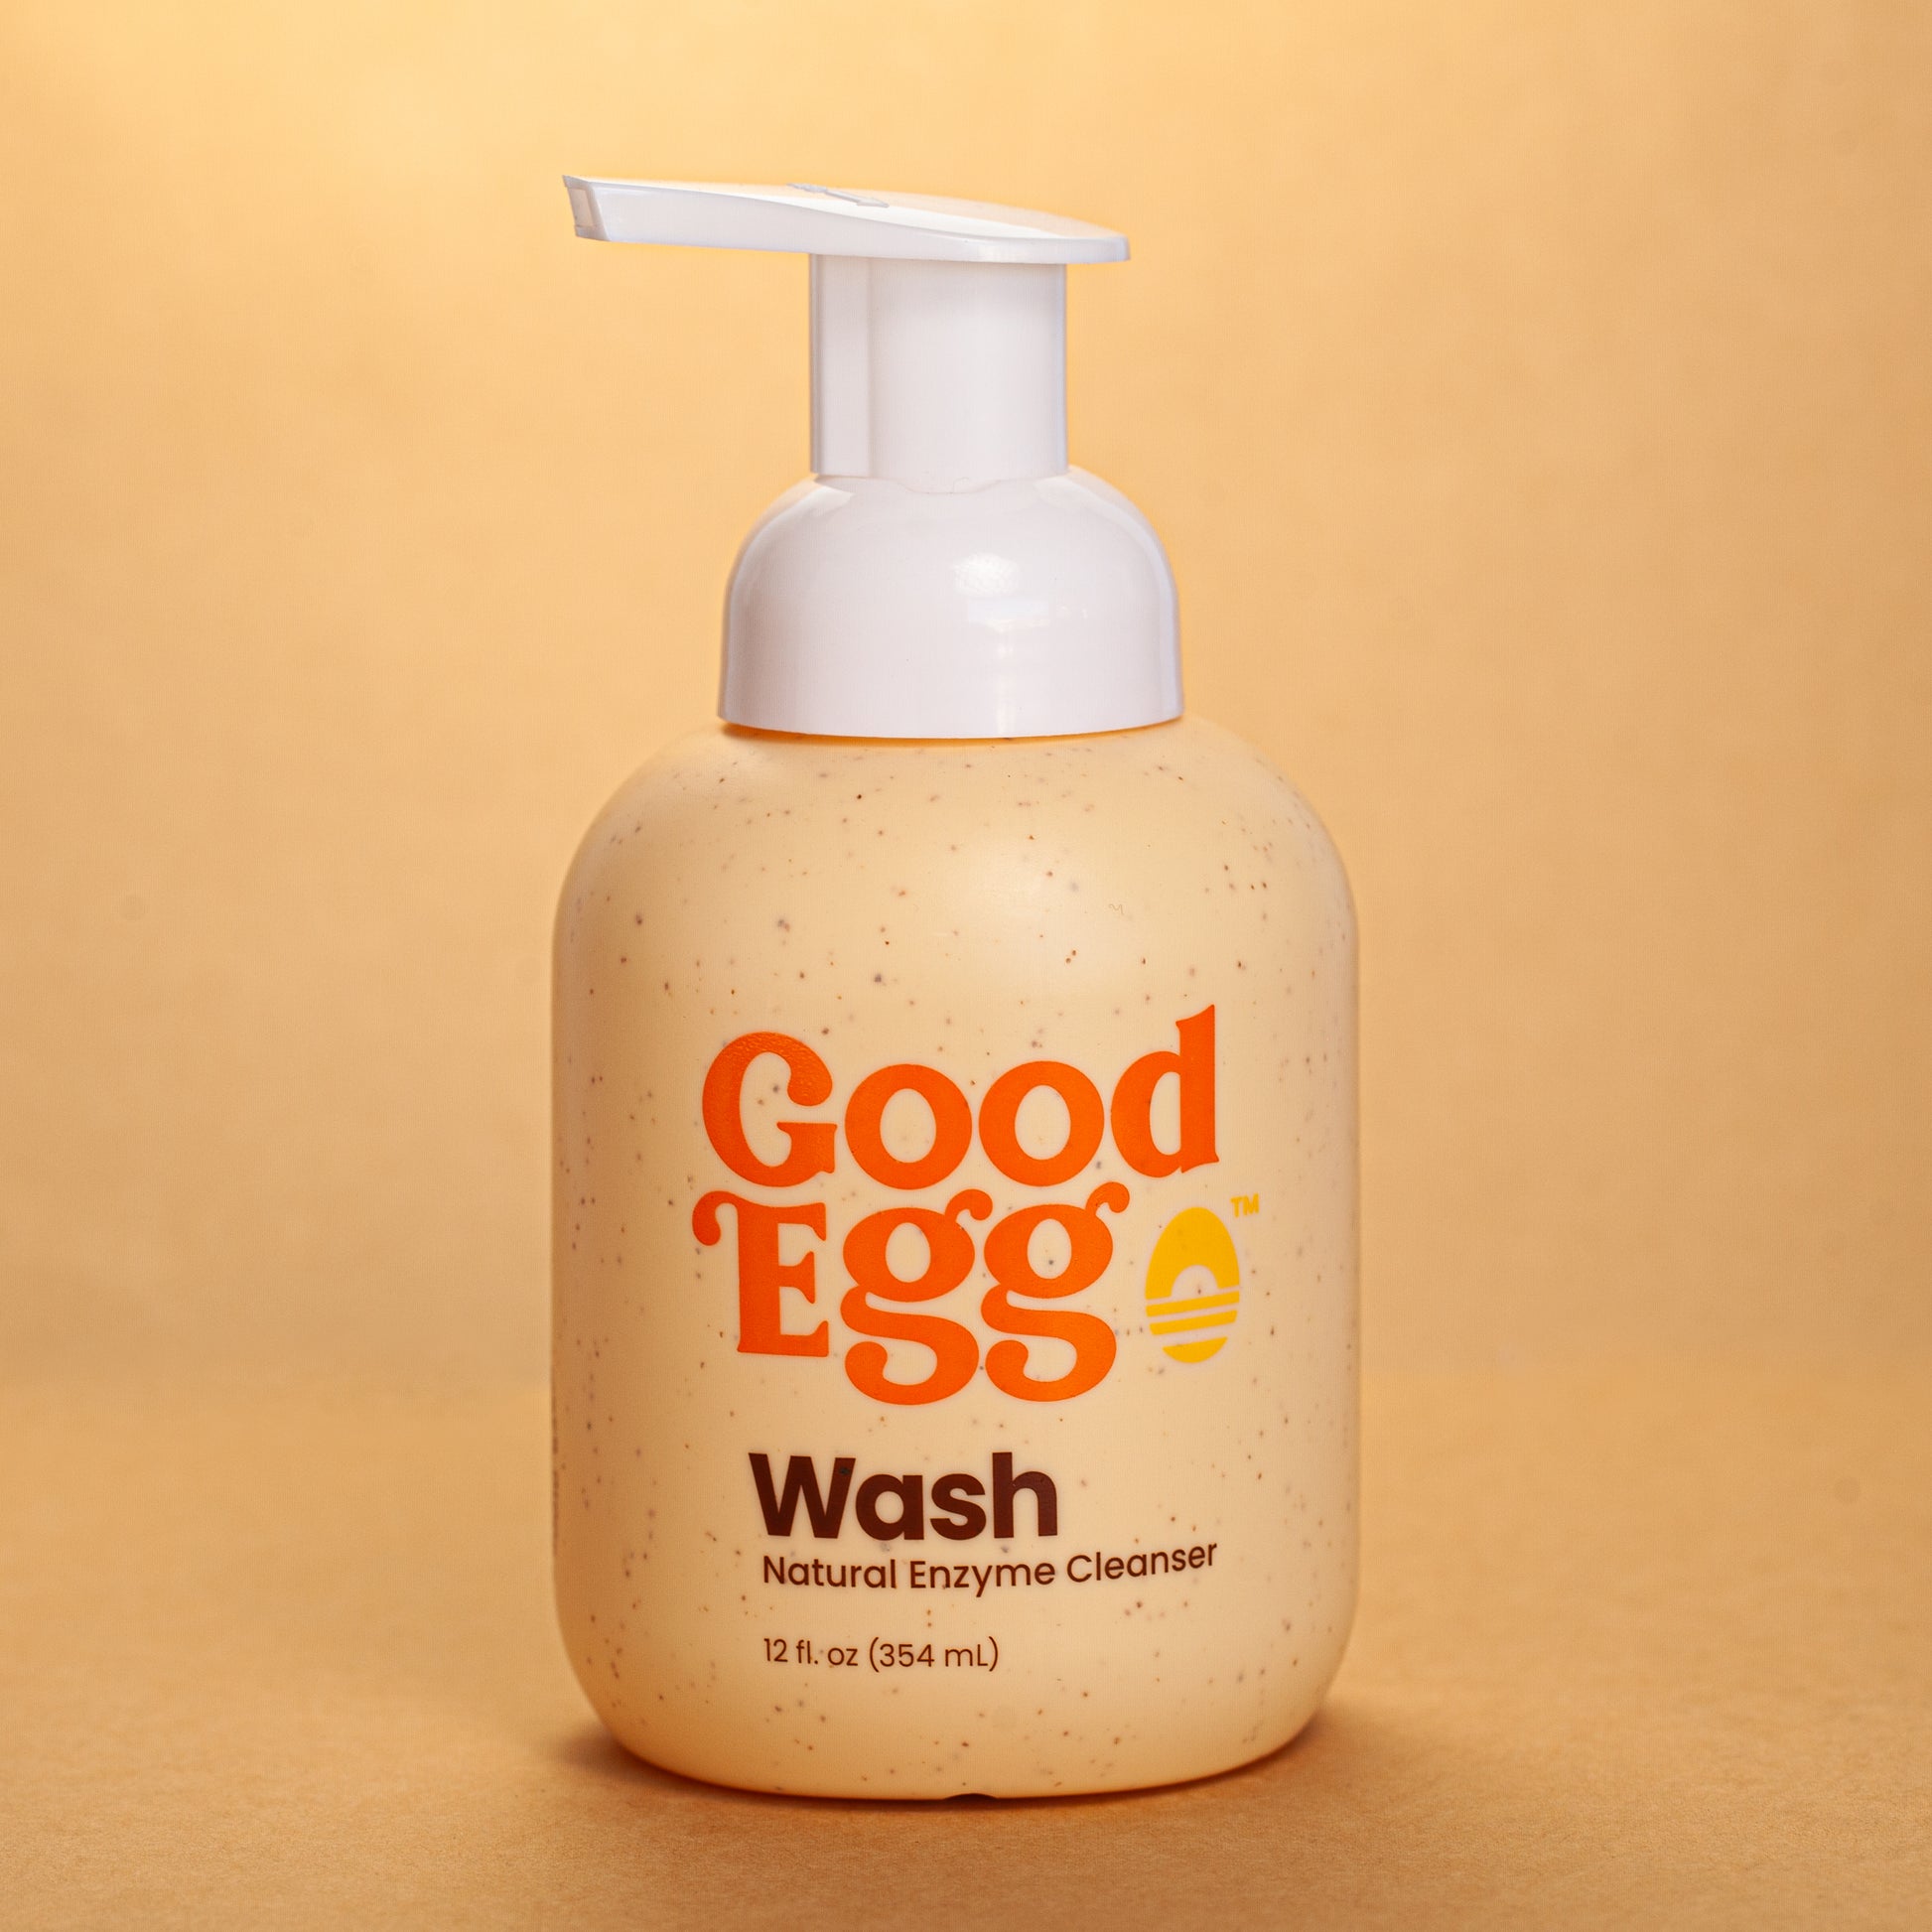 When And How To Wash Fresh Eggs